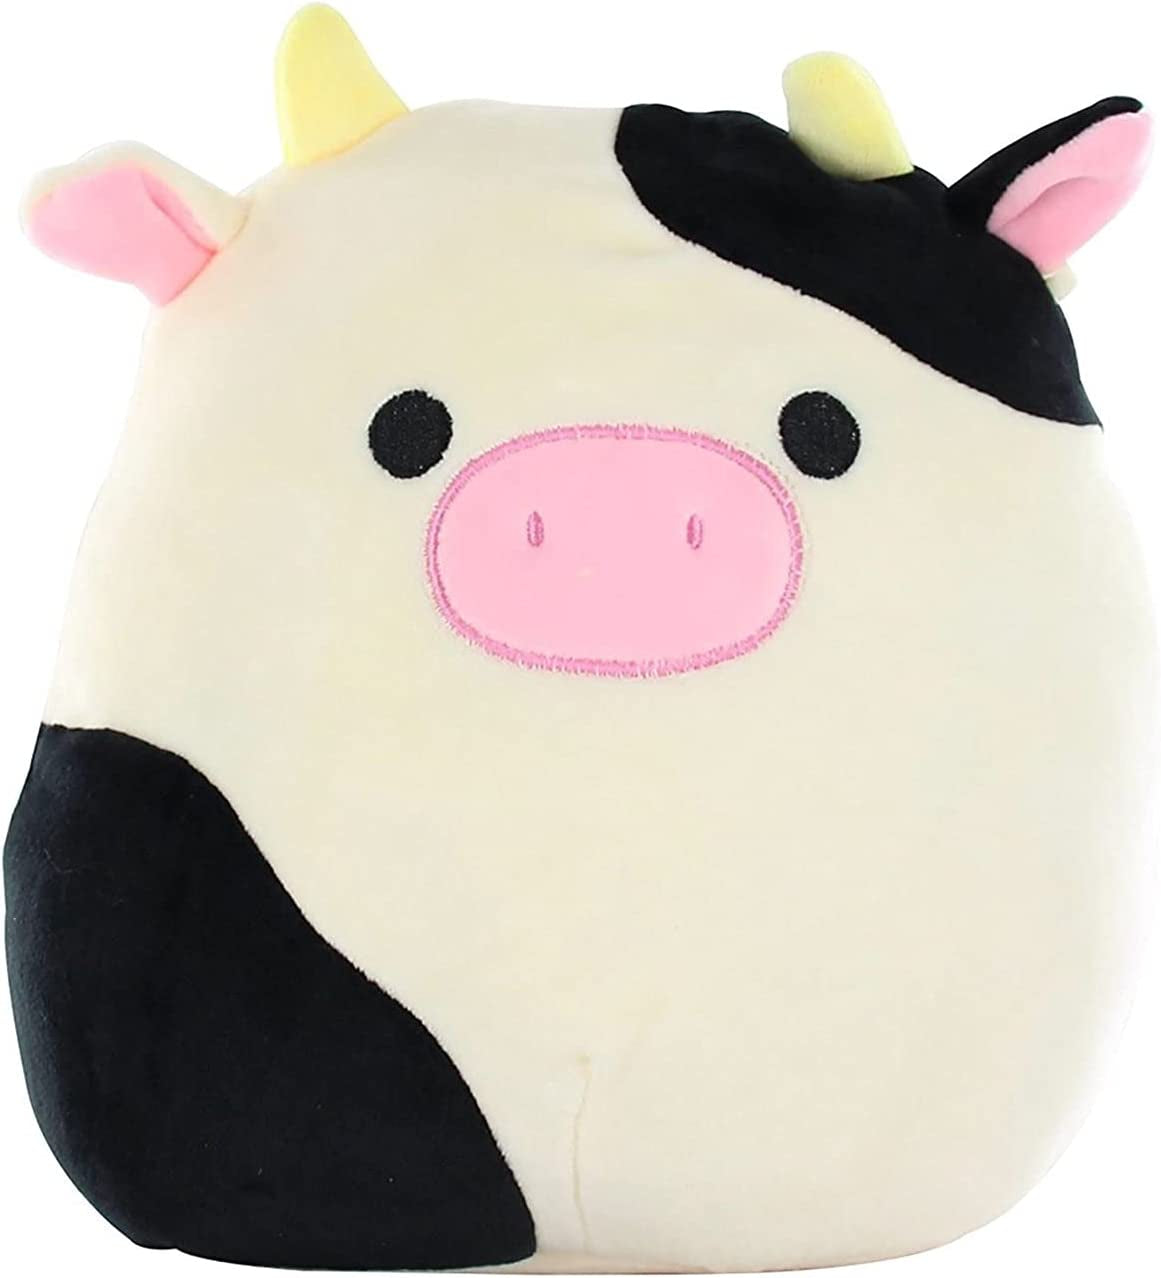 Squishmallows Official Kellytoy Plush 8 Inch Squishy Soft Plush Toy Animals (Connor the Cow)